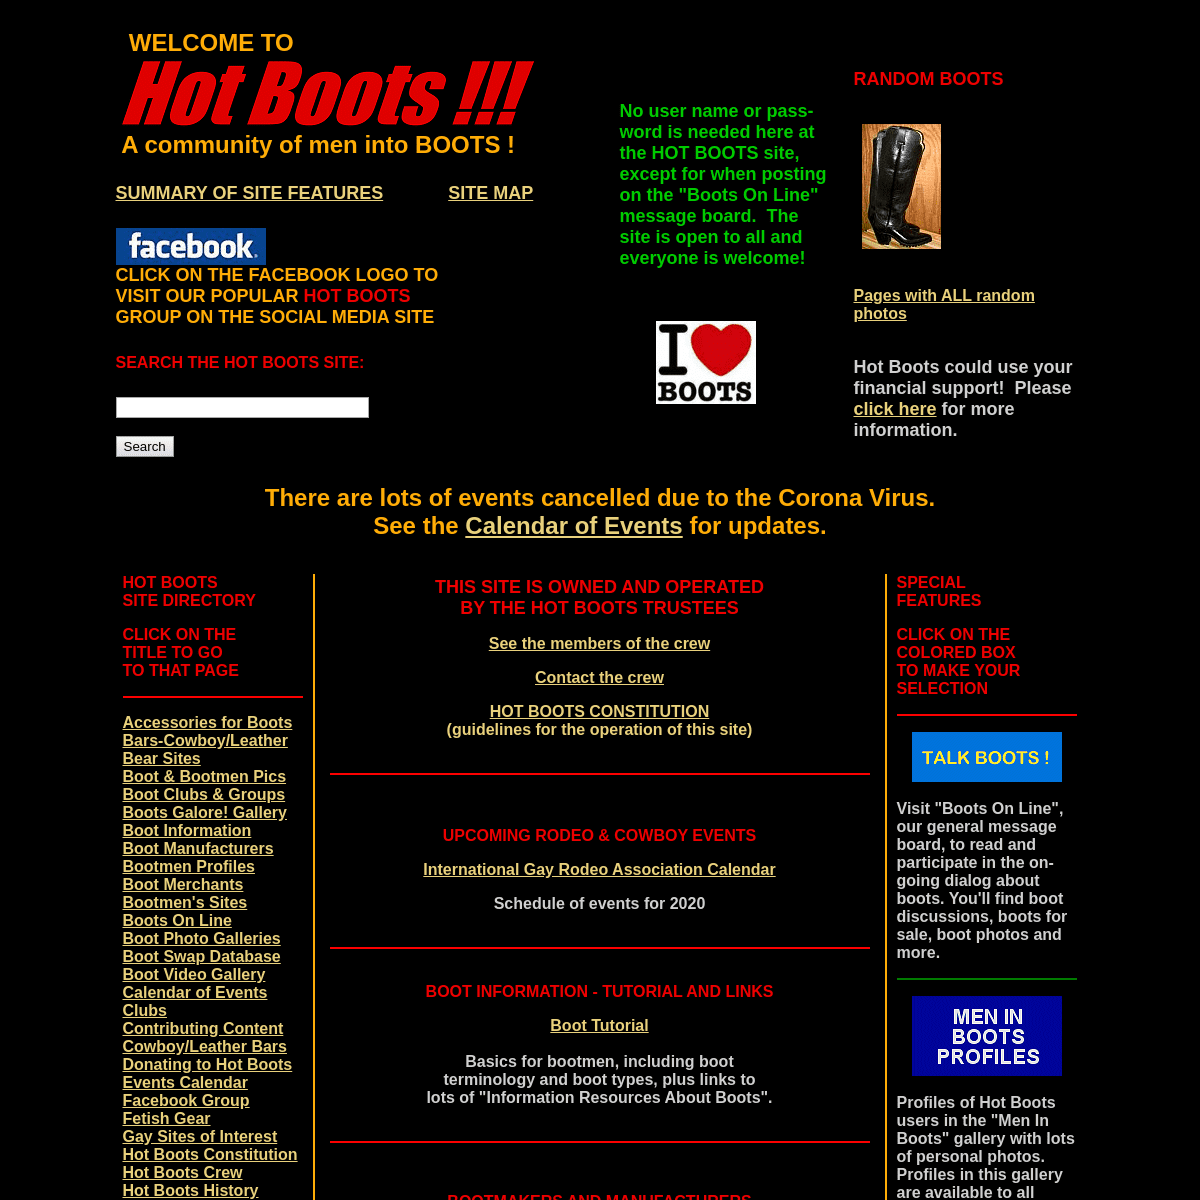 A complete backup of hotboots.com